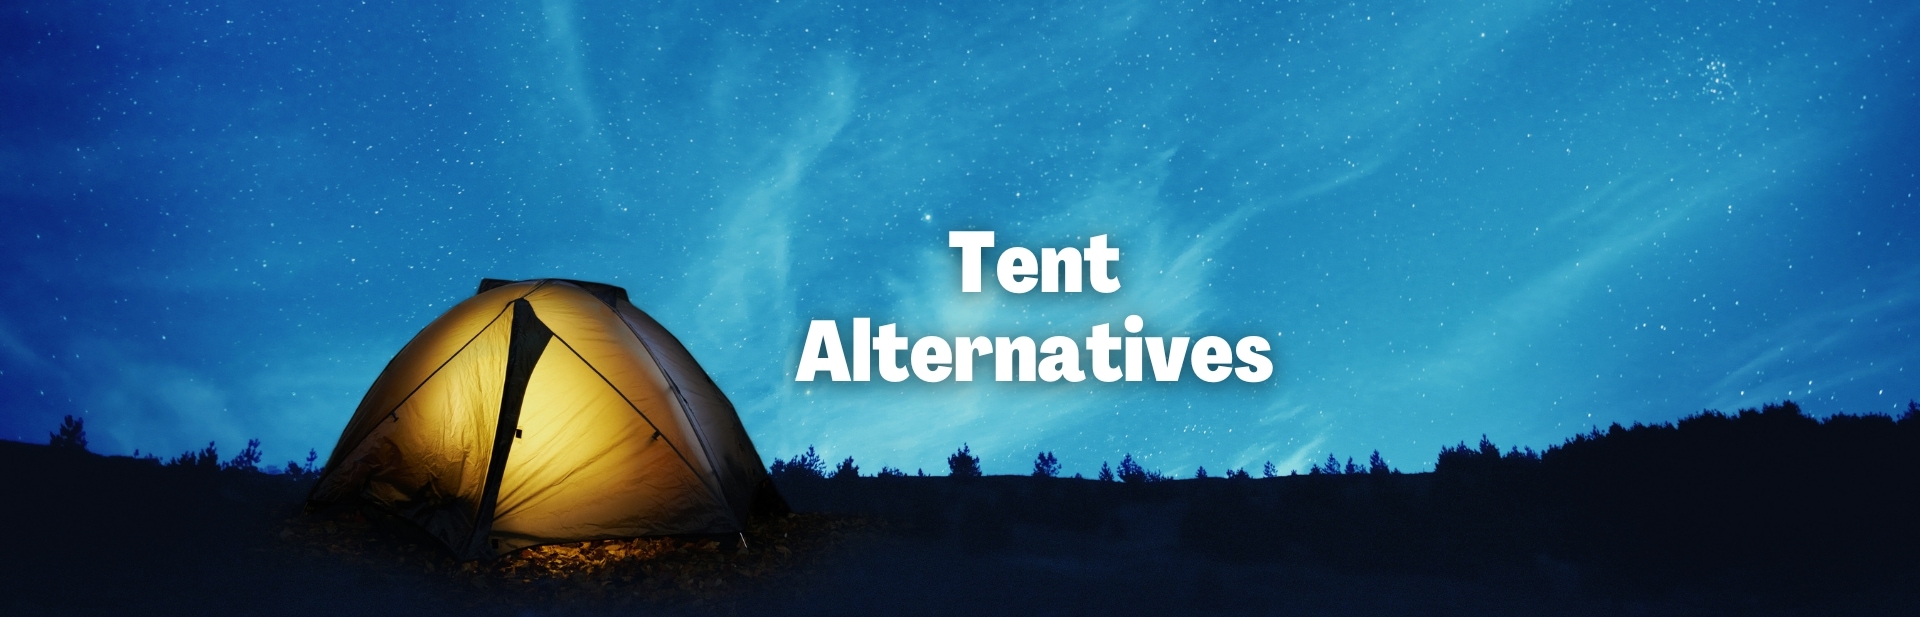 18 Tent Alternatives for Every Adventure: From Hammocks to Yurts